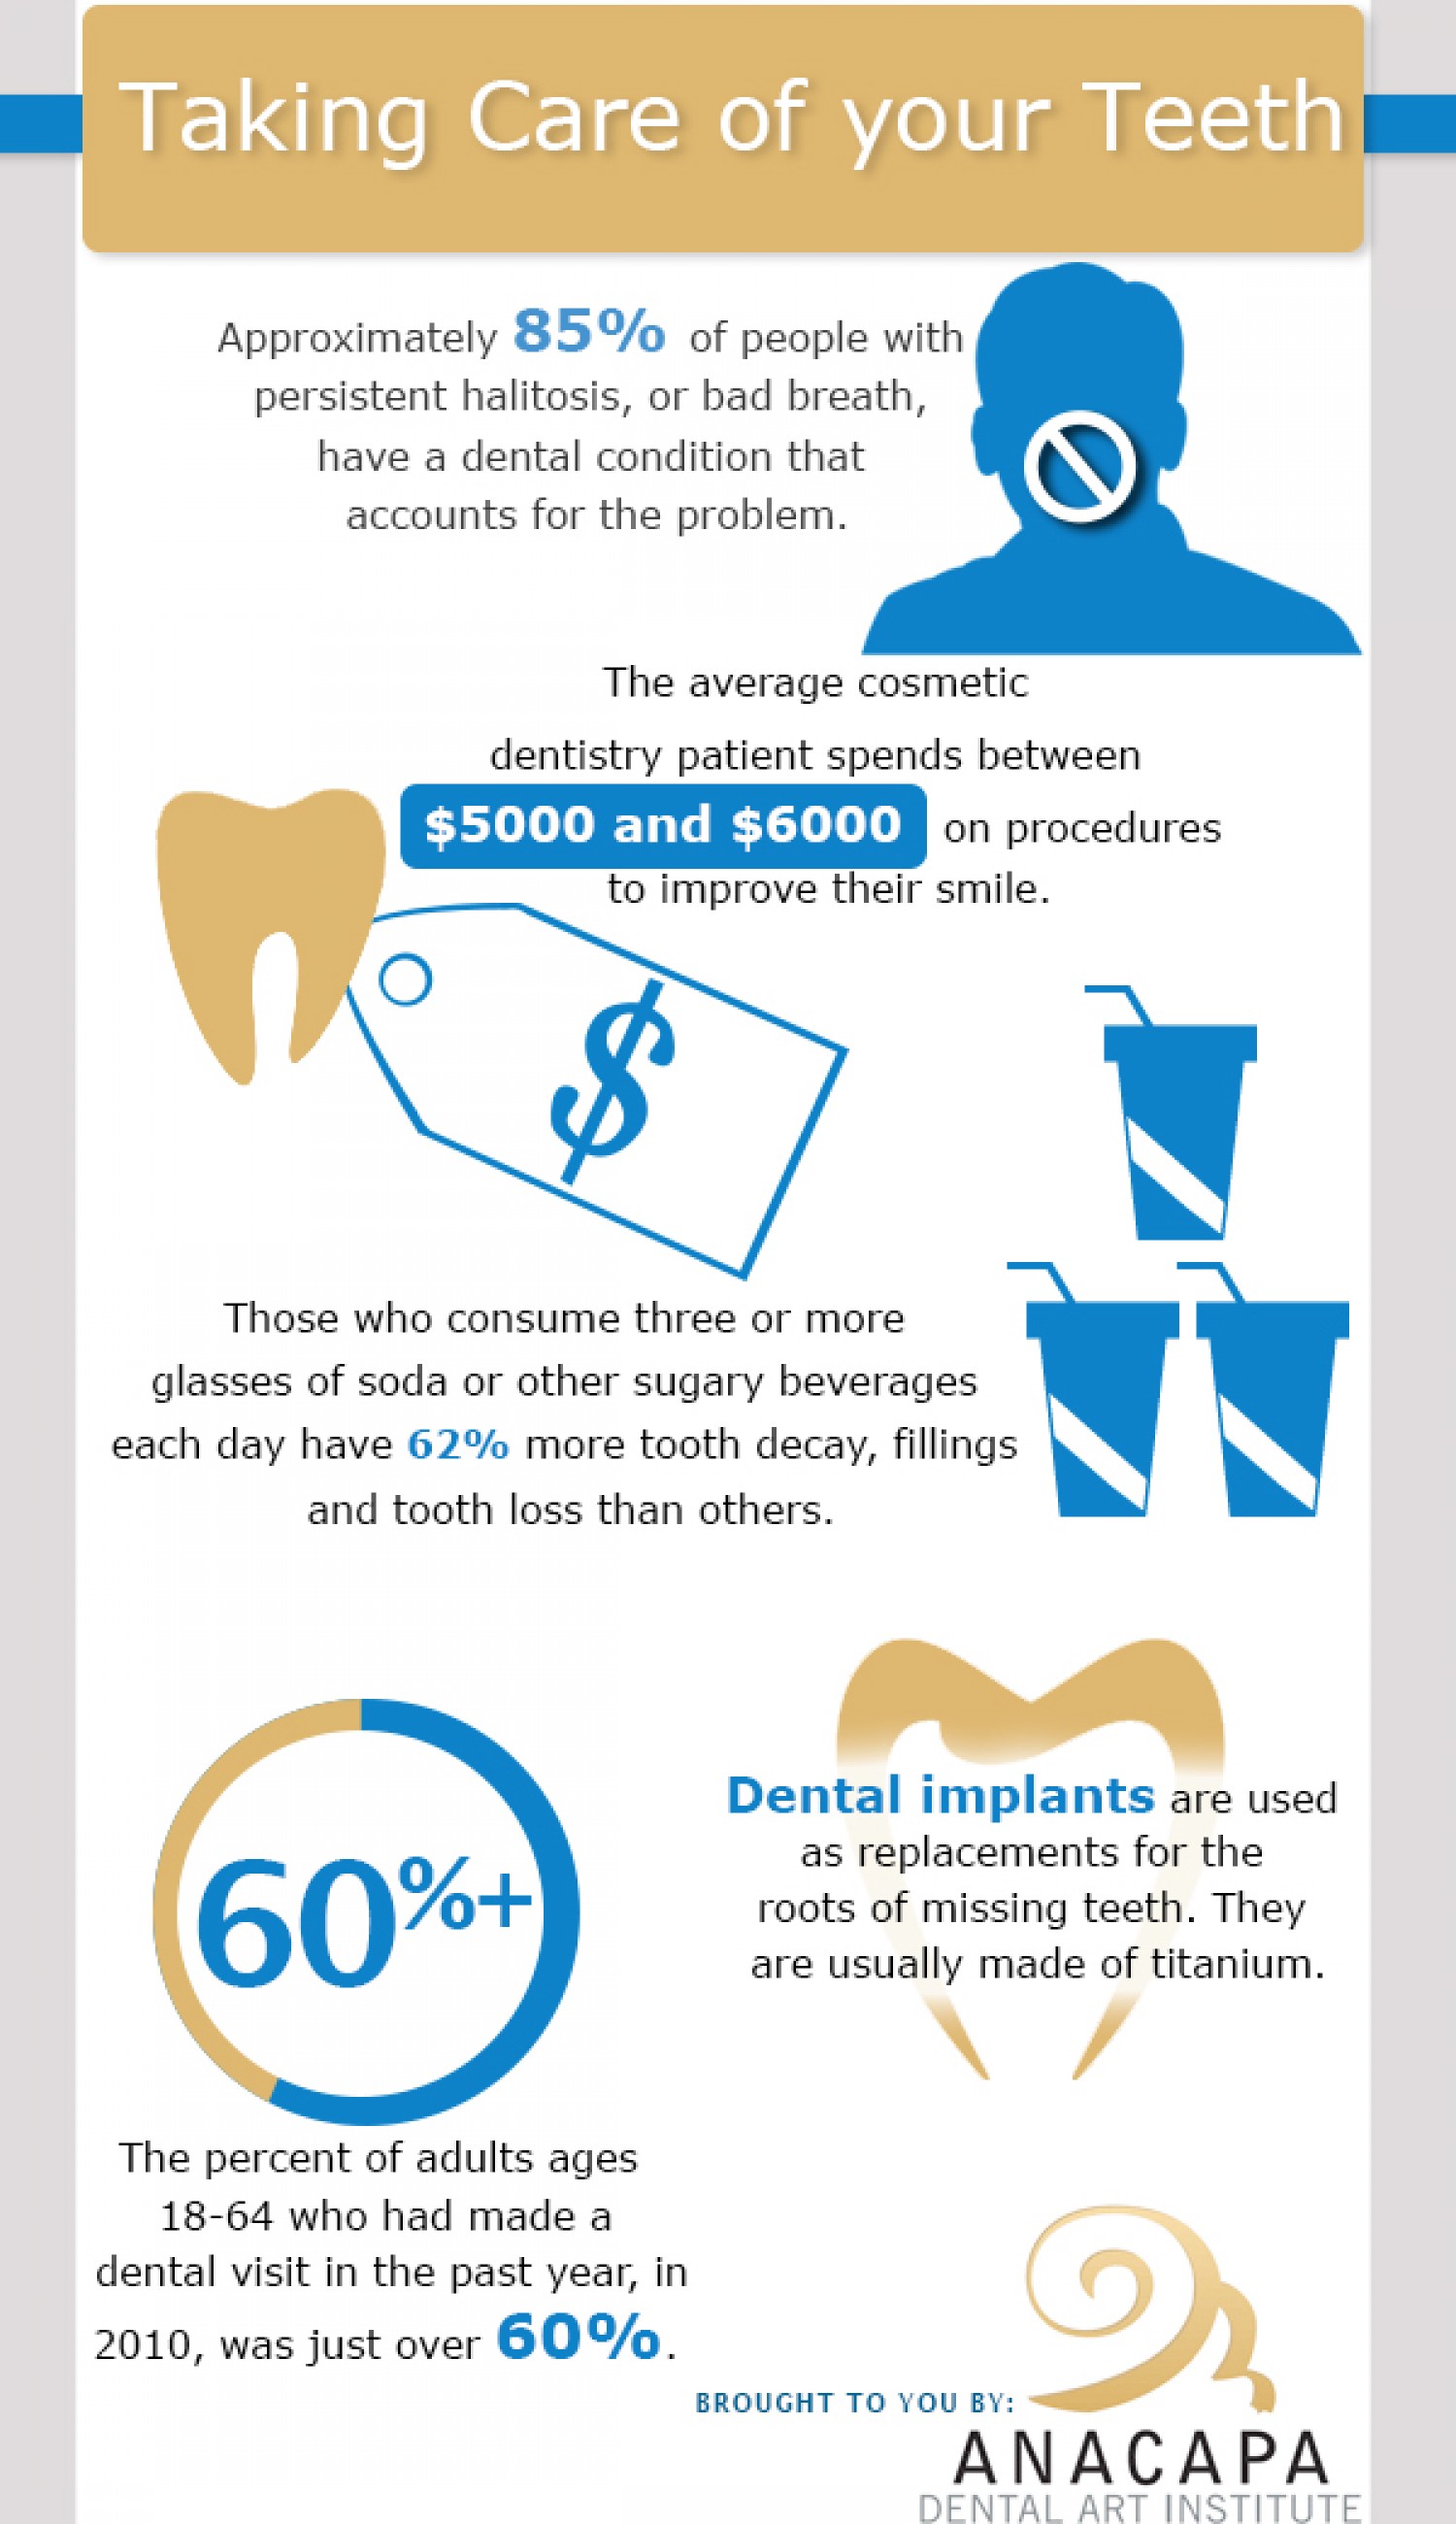 5 Tips For Teeth Care Infographic